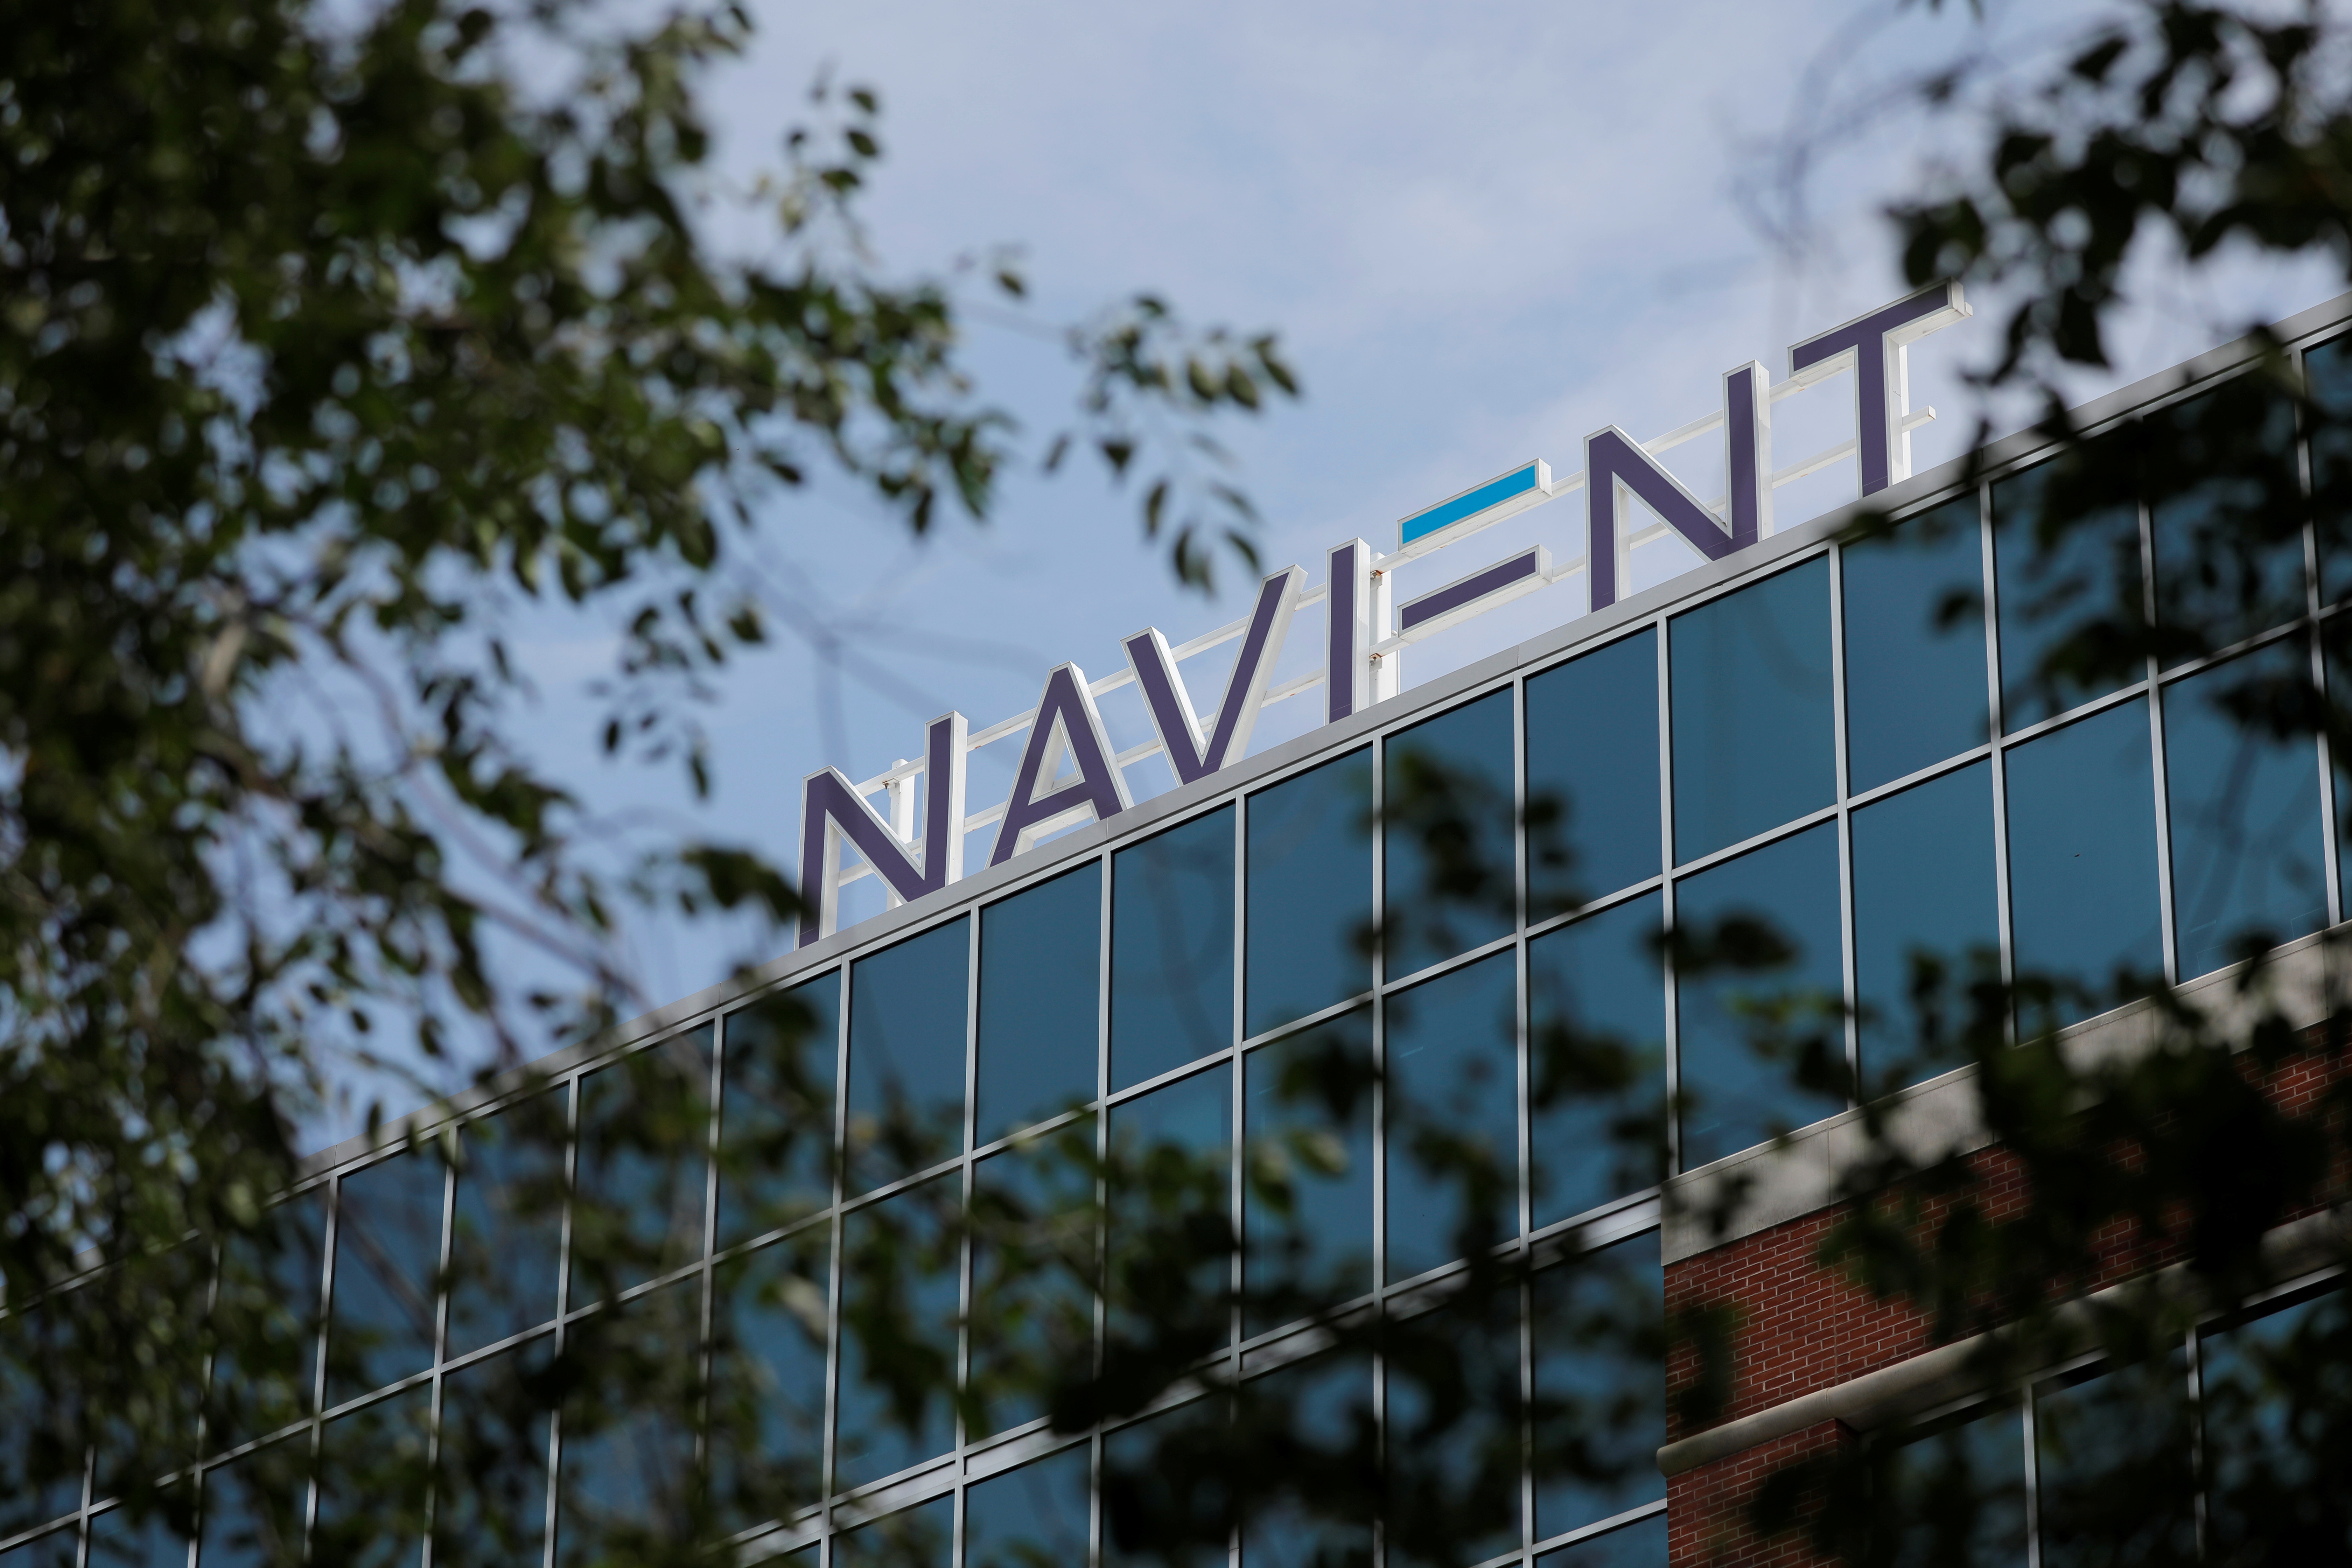 Signage is seen on the offices of Navient in Wilmington, Delaware